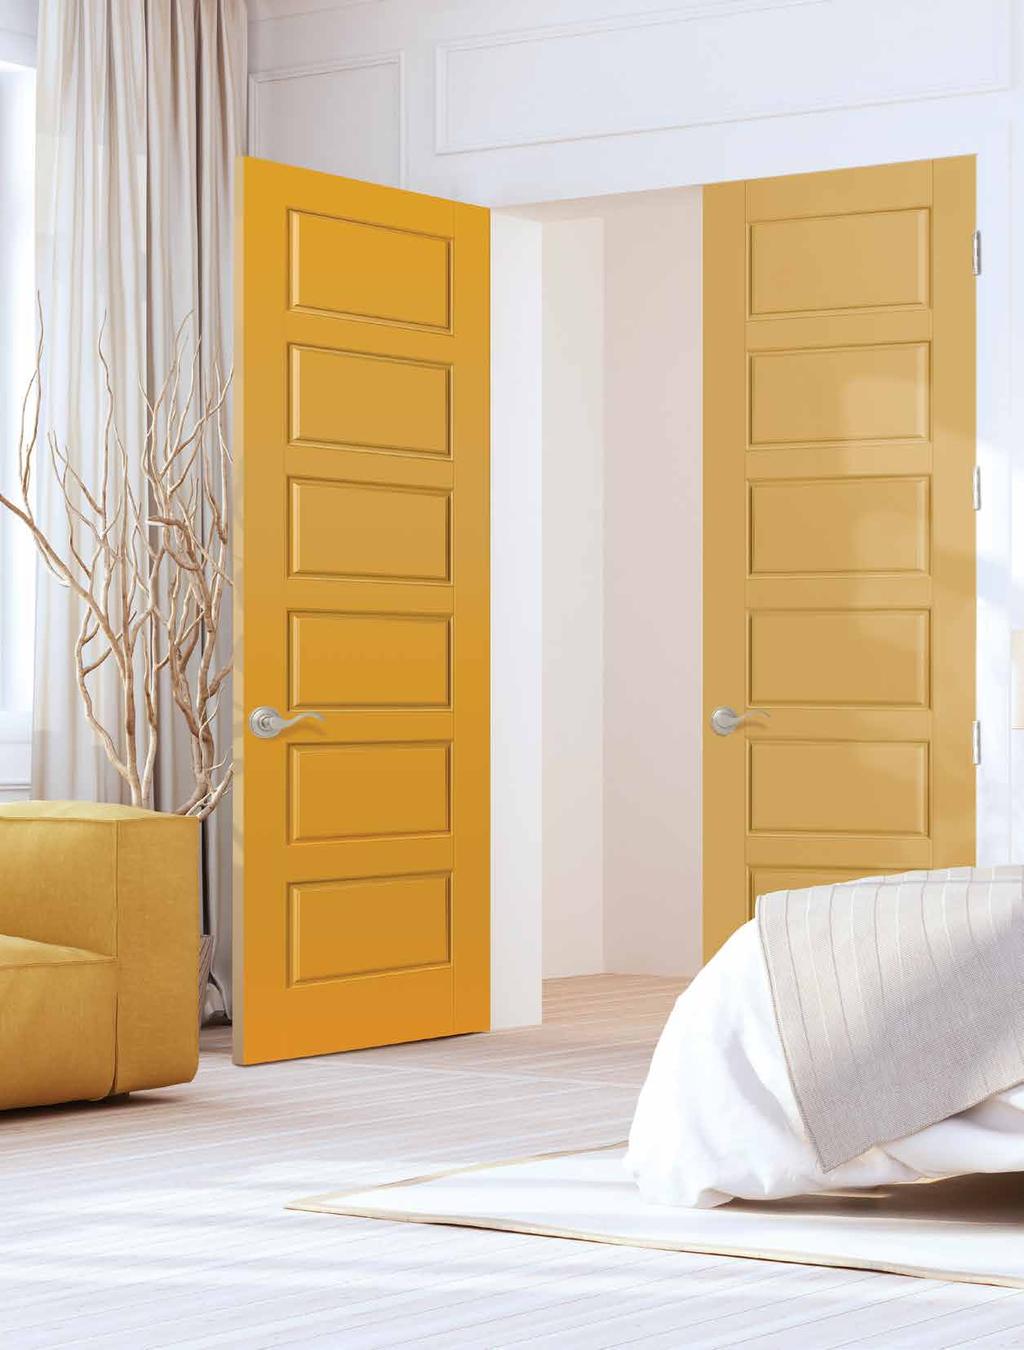 MOULDED PANEL Madero is proud to partner with Masonite to provide moulded panel doors that have been transforming interiors for over 80 years.